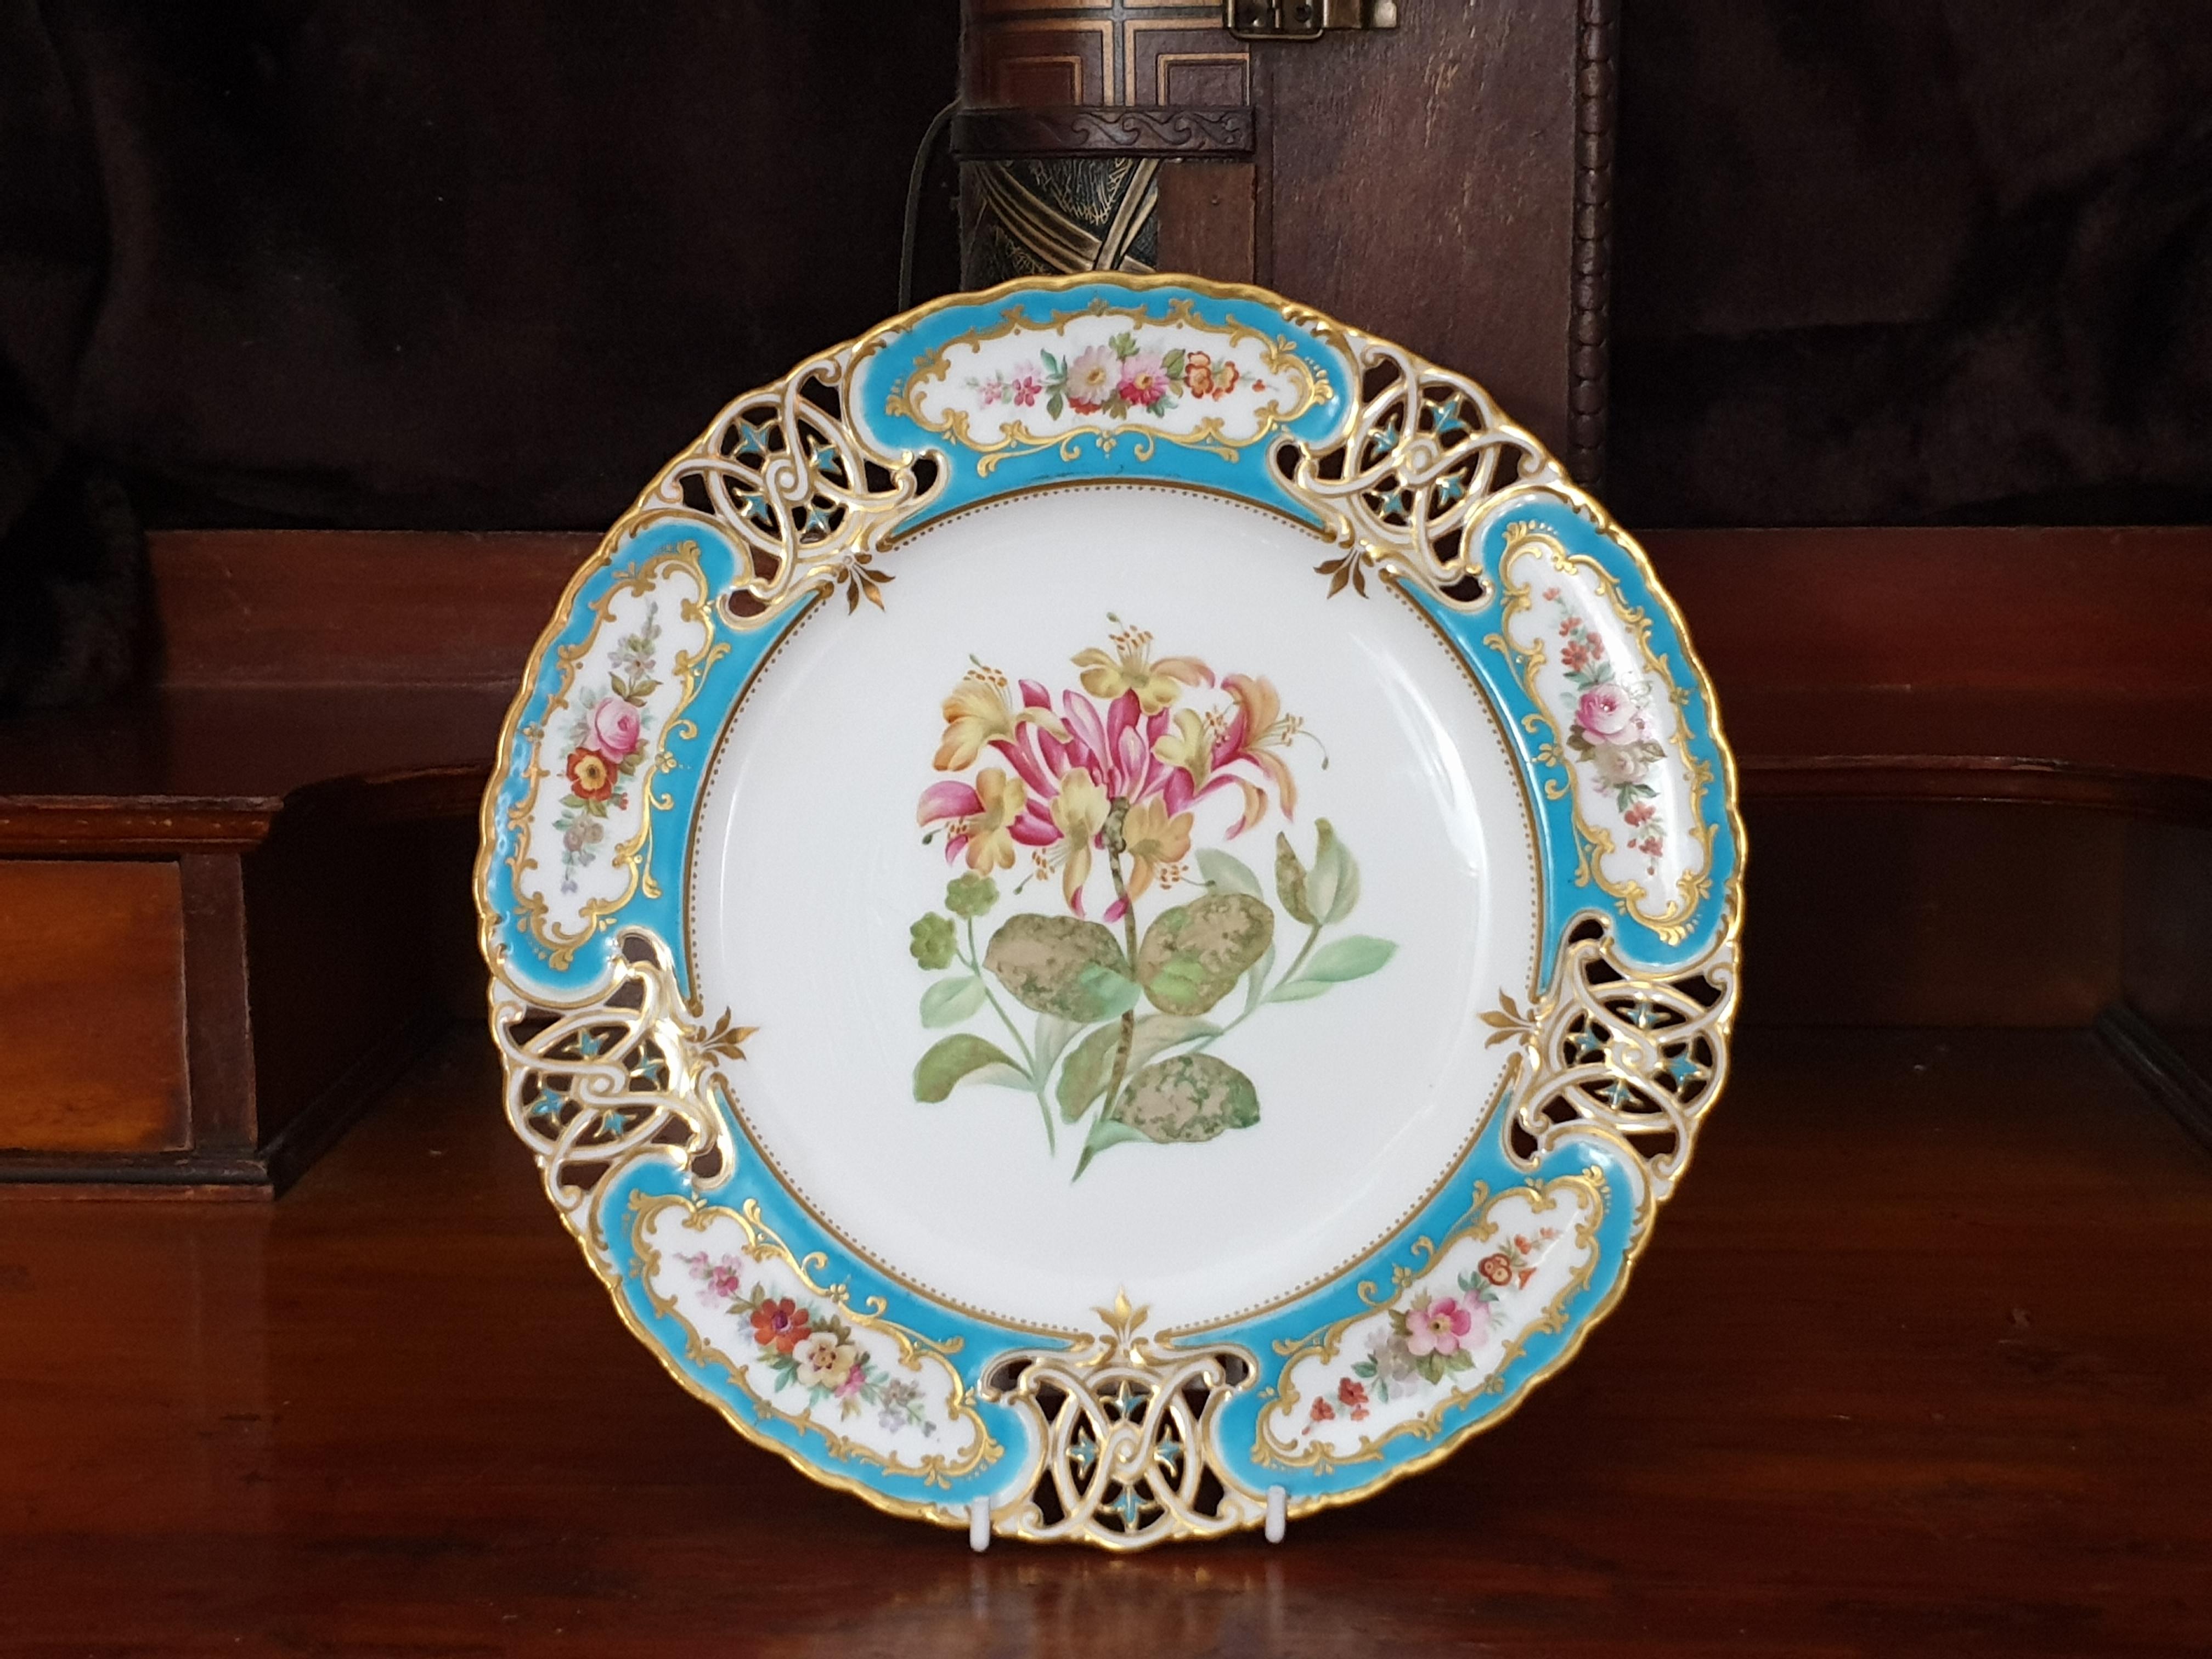 British Colonial English Minton Reticulated Royal Arms Botanical Turquoise Dessert Service For Sale